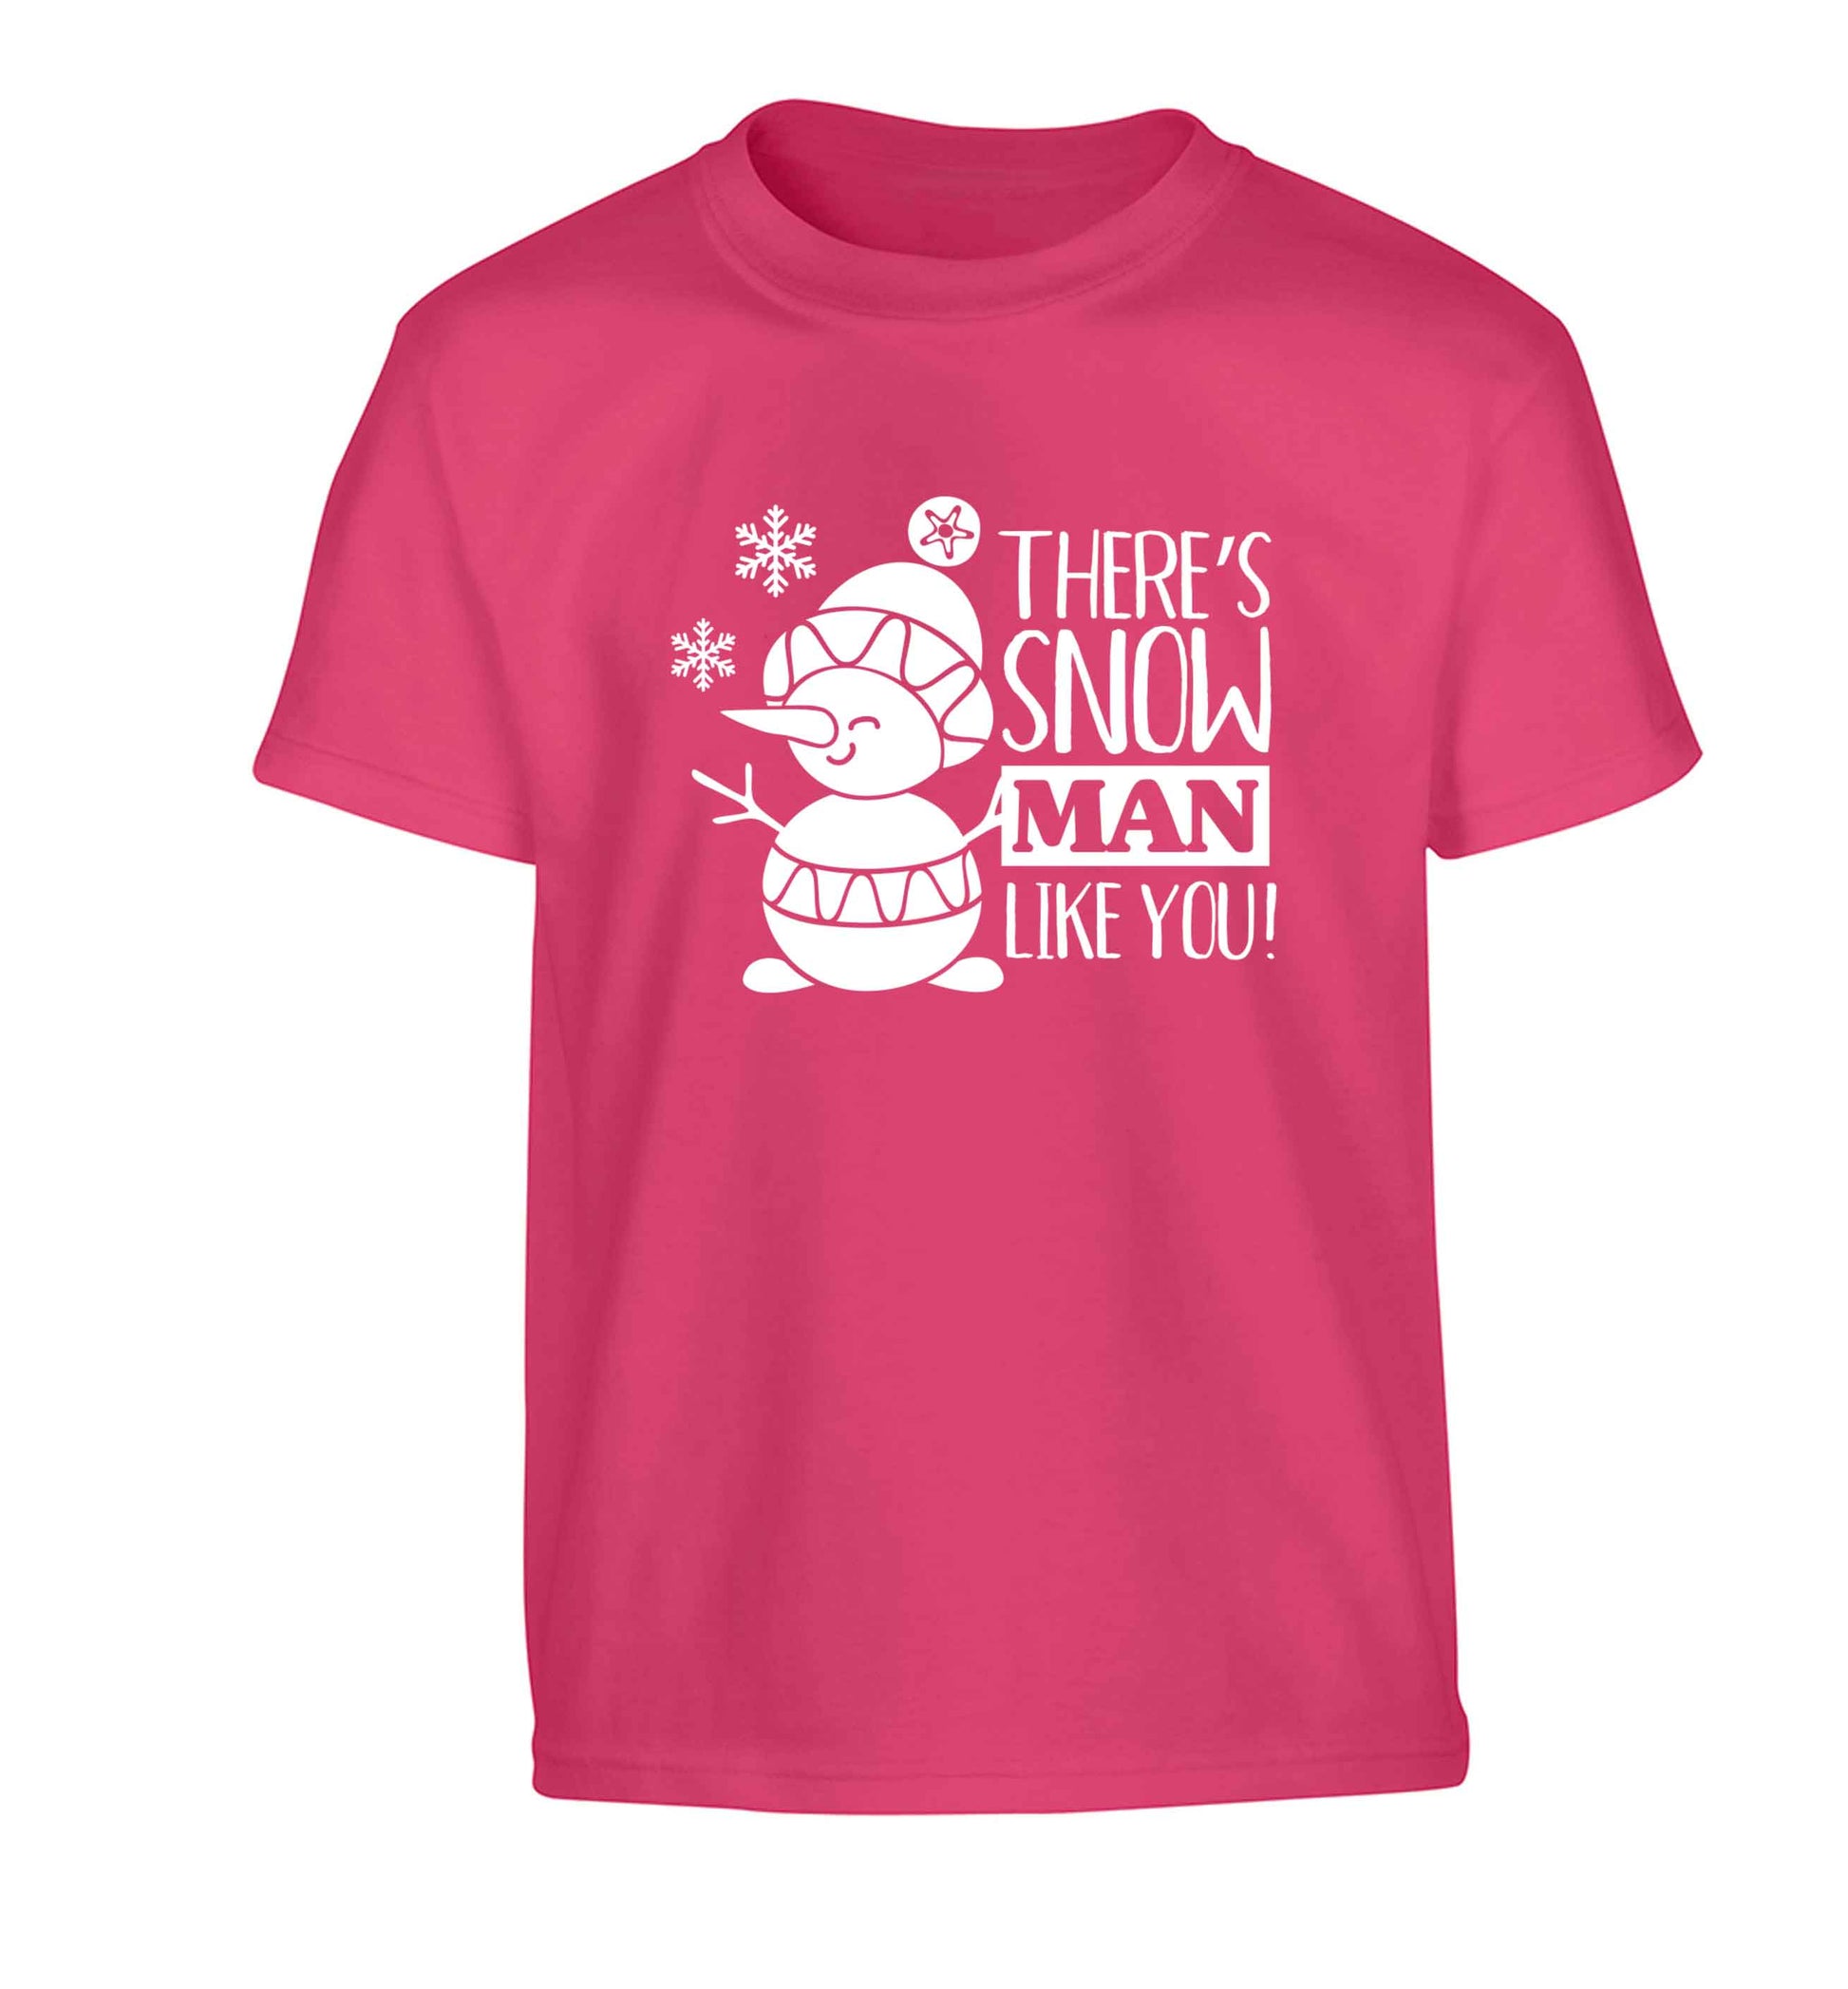 There's snow man like you Children's pink Tshirt 12-13 Years